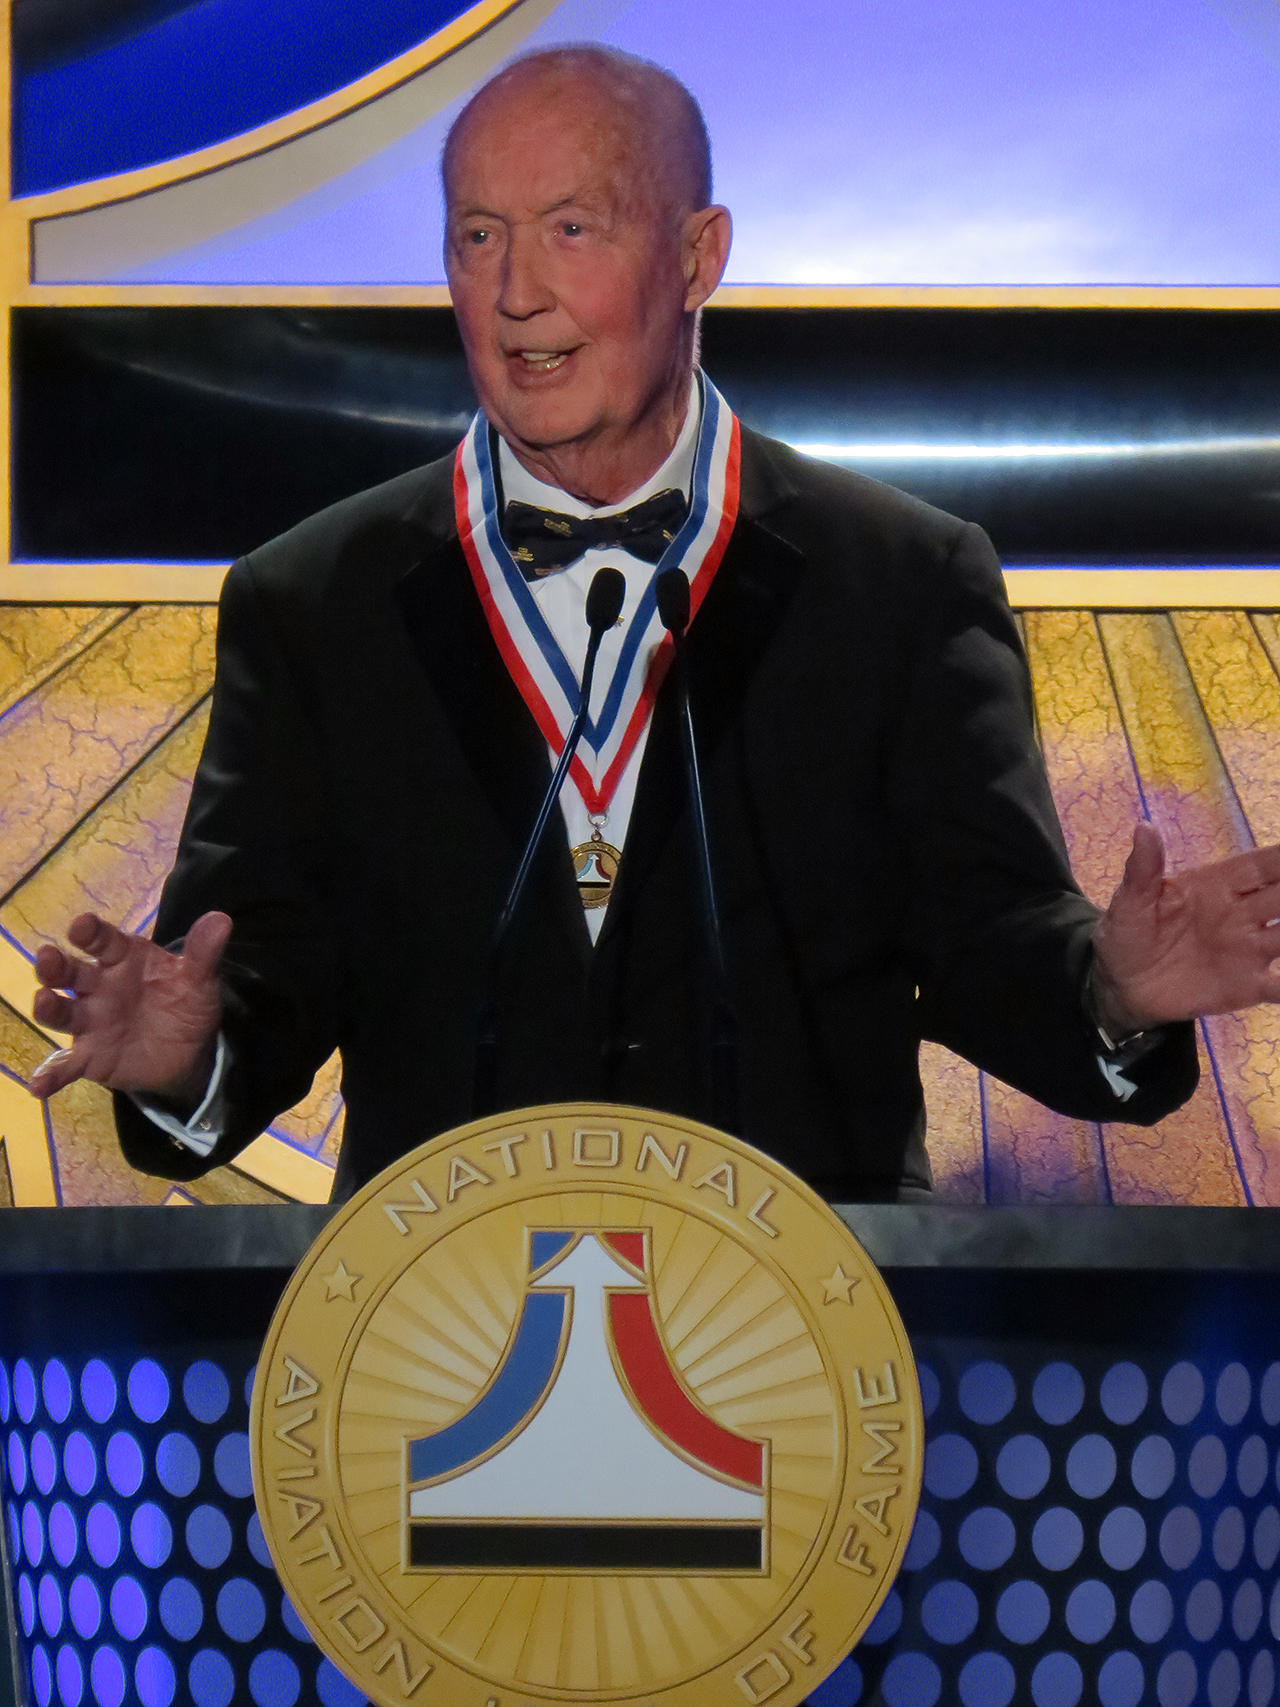 Jim McDivitt at his induction into the National Aviation Hall of Fame in Dayton, Ohio in 2014.